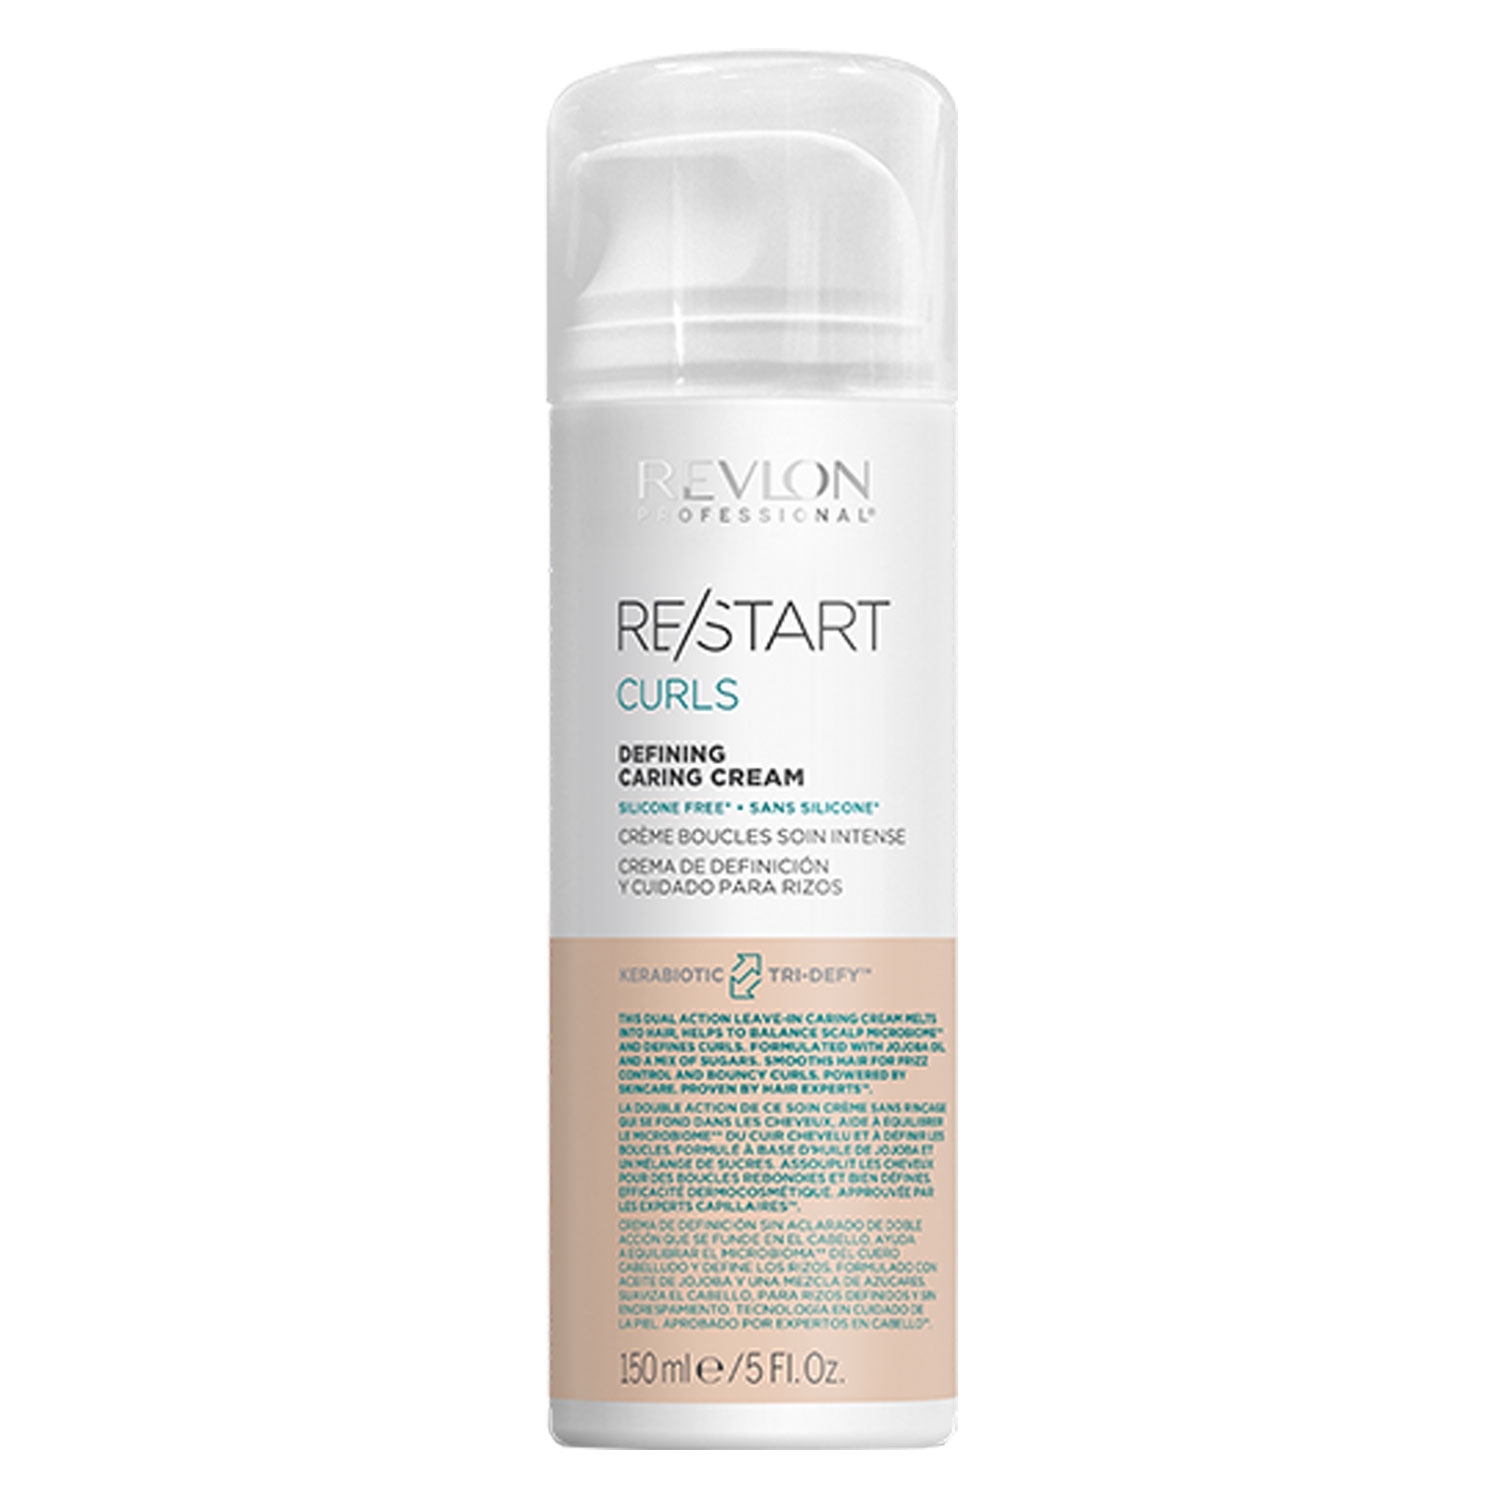 Product image from RE/START CURLS - Defining Caring Cream